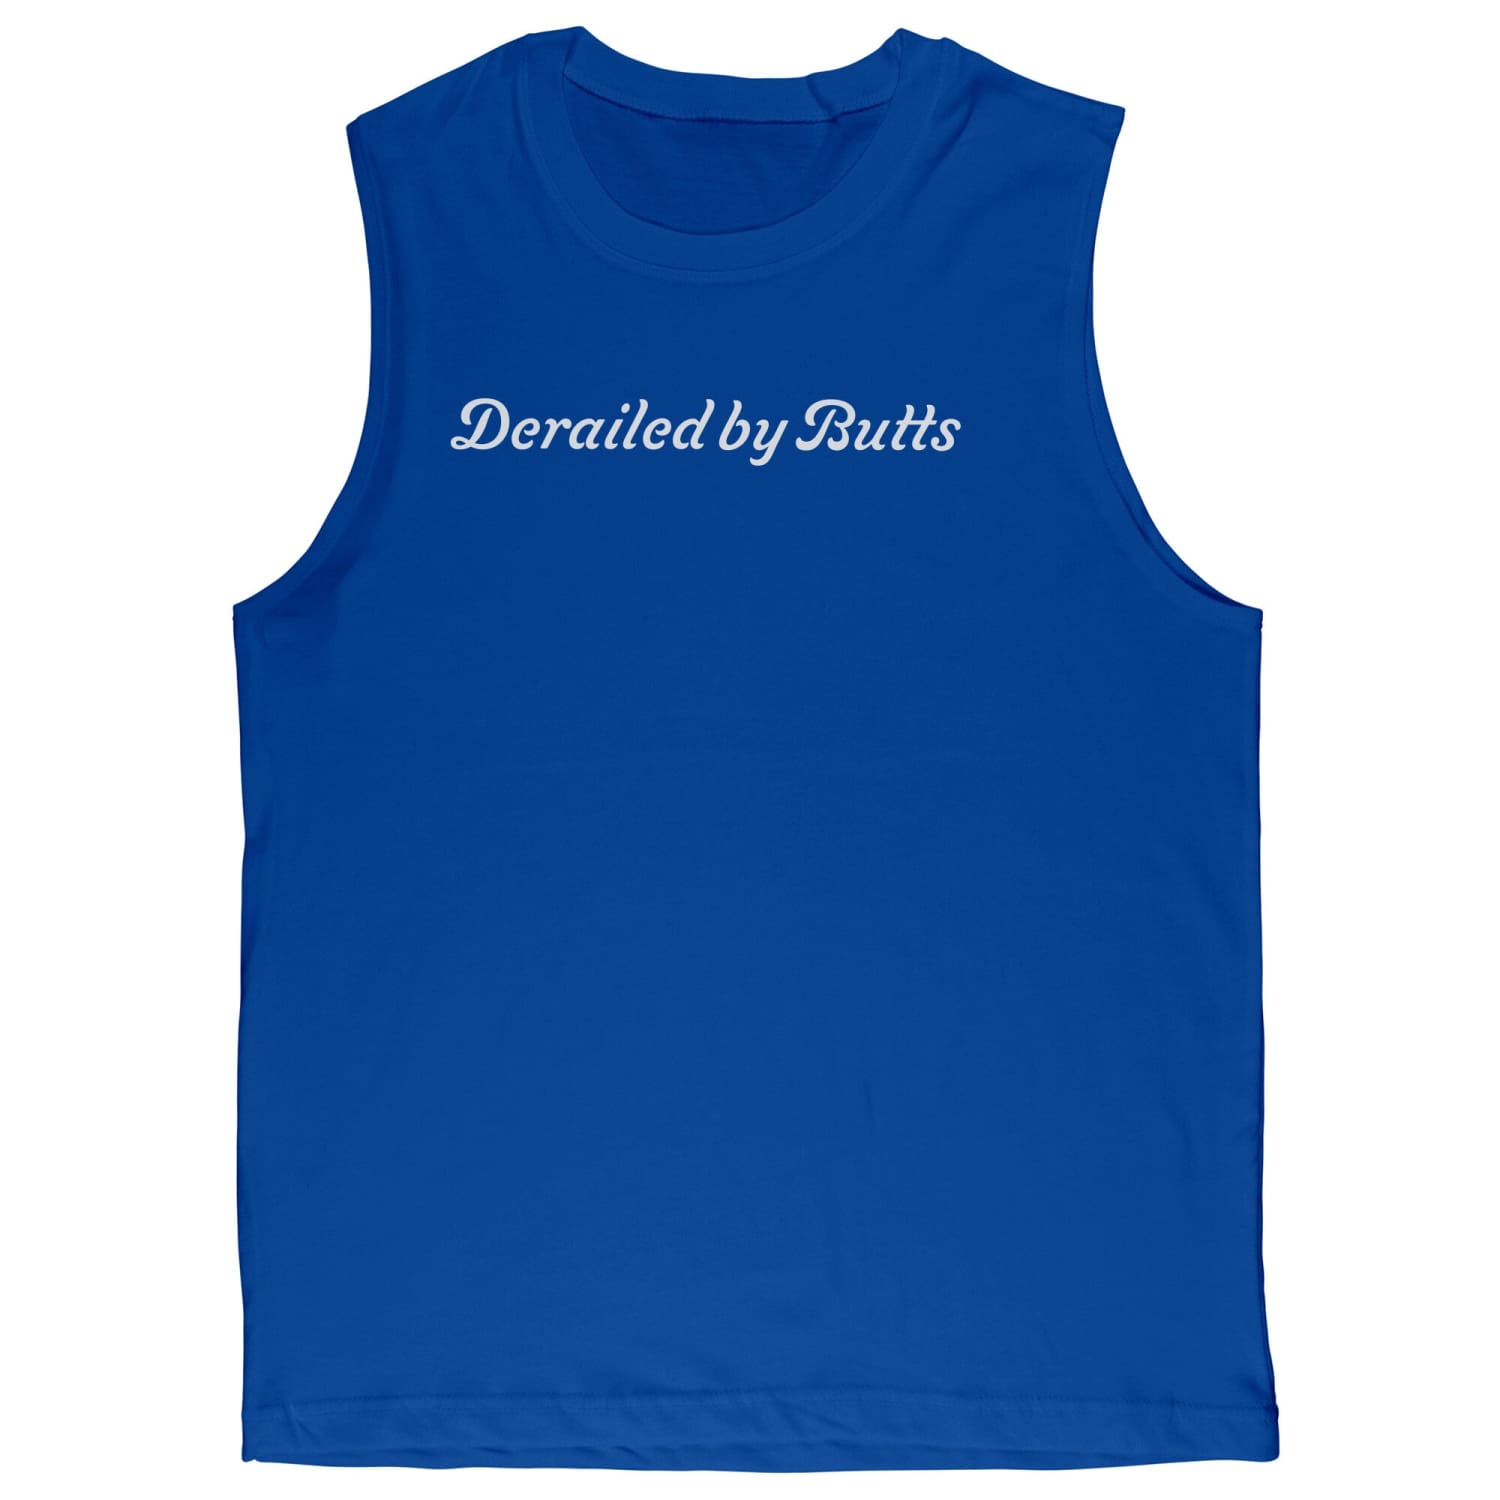 Derailed By Butts Sleeveless Muscle Tee - True Royal / S - Apparel